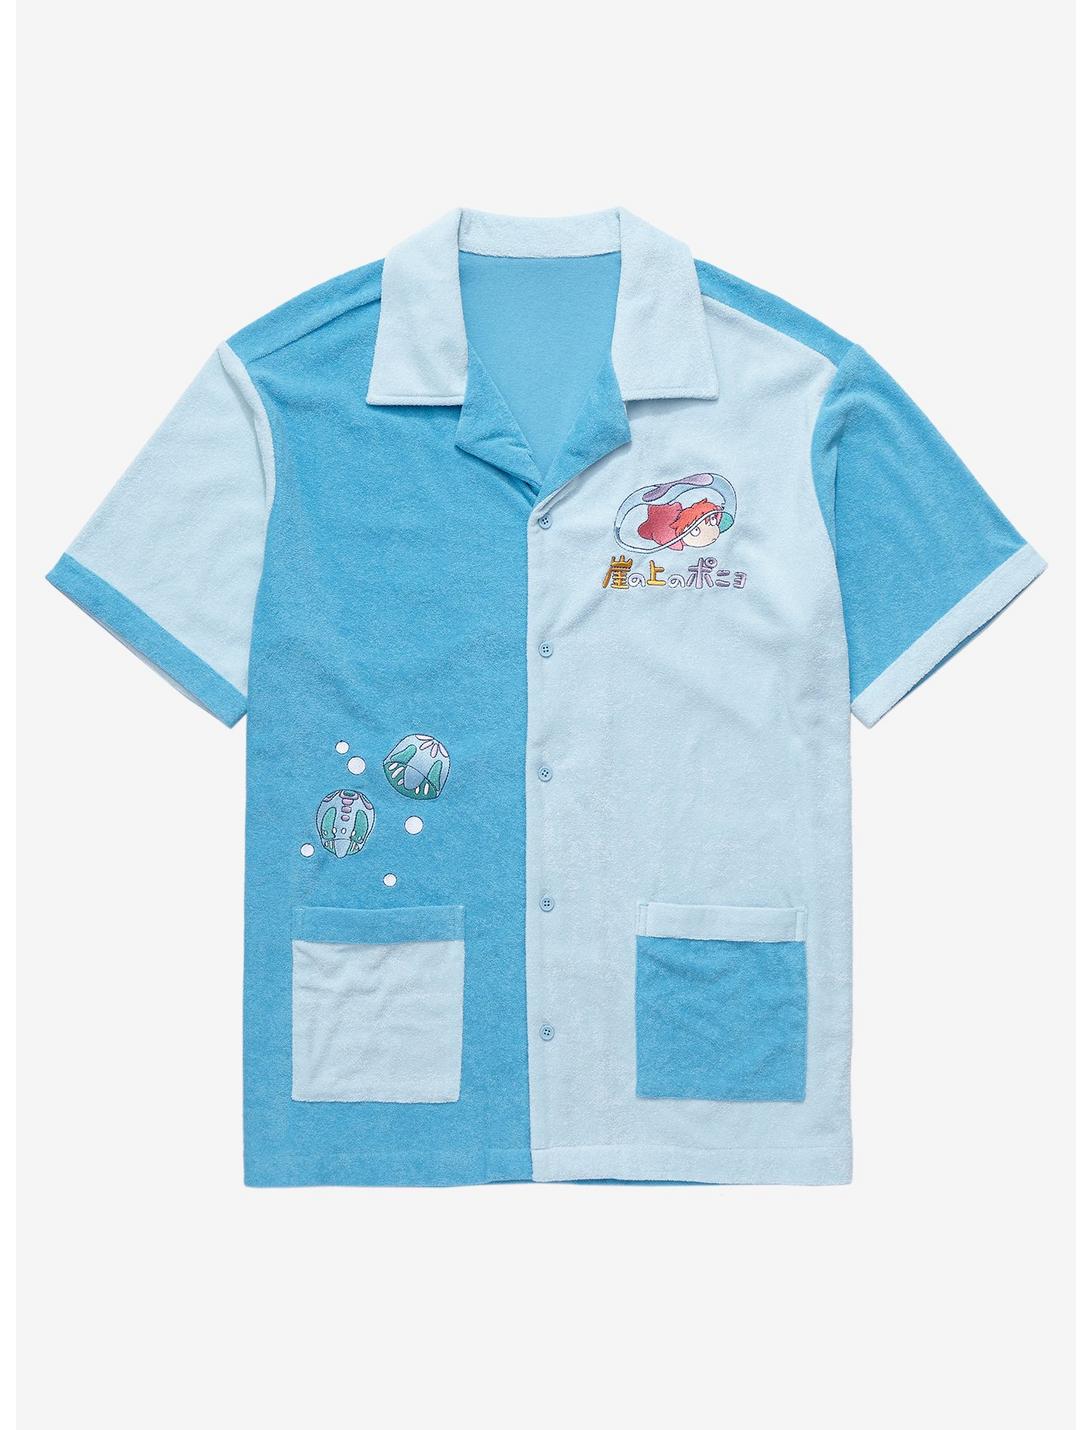 Our Universe Studio Ghibli Ponyo Terry Cloth Button-Up - BoxLunch Exclusive, BLUE, hi-res